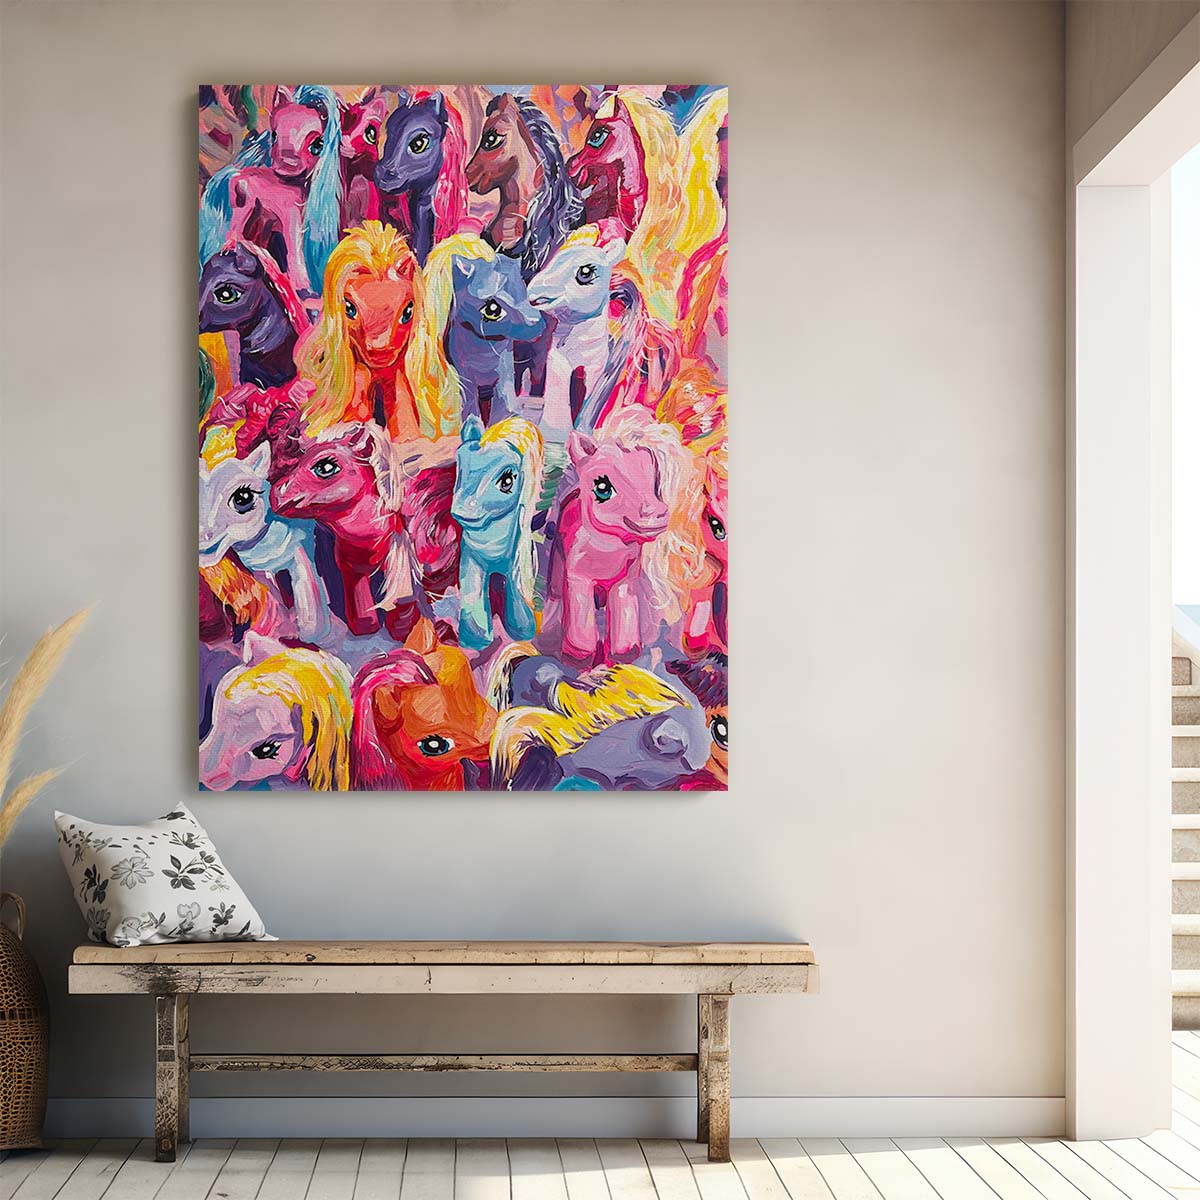 Colorful Ponies Illustration Nostalgic 90s Kids' Playroom Wall Art by Luxuriance Designs, made in USA